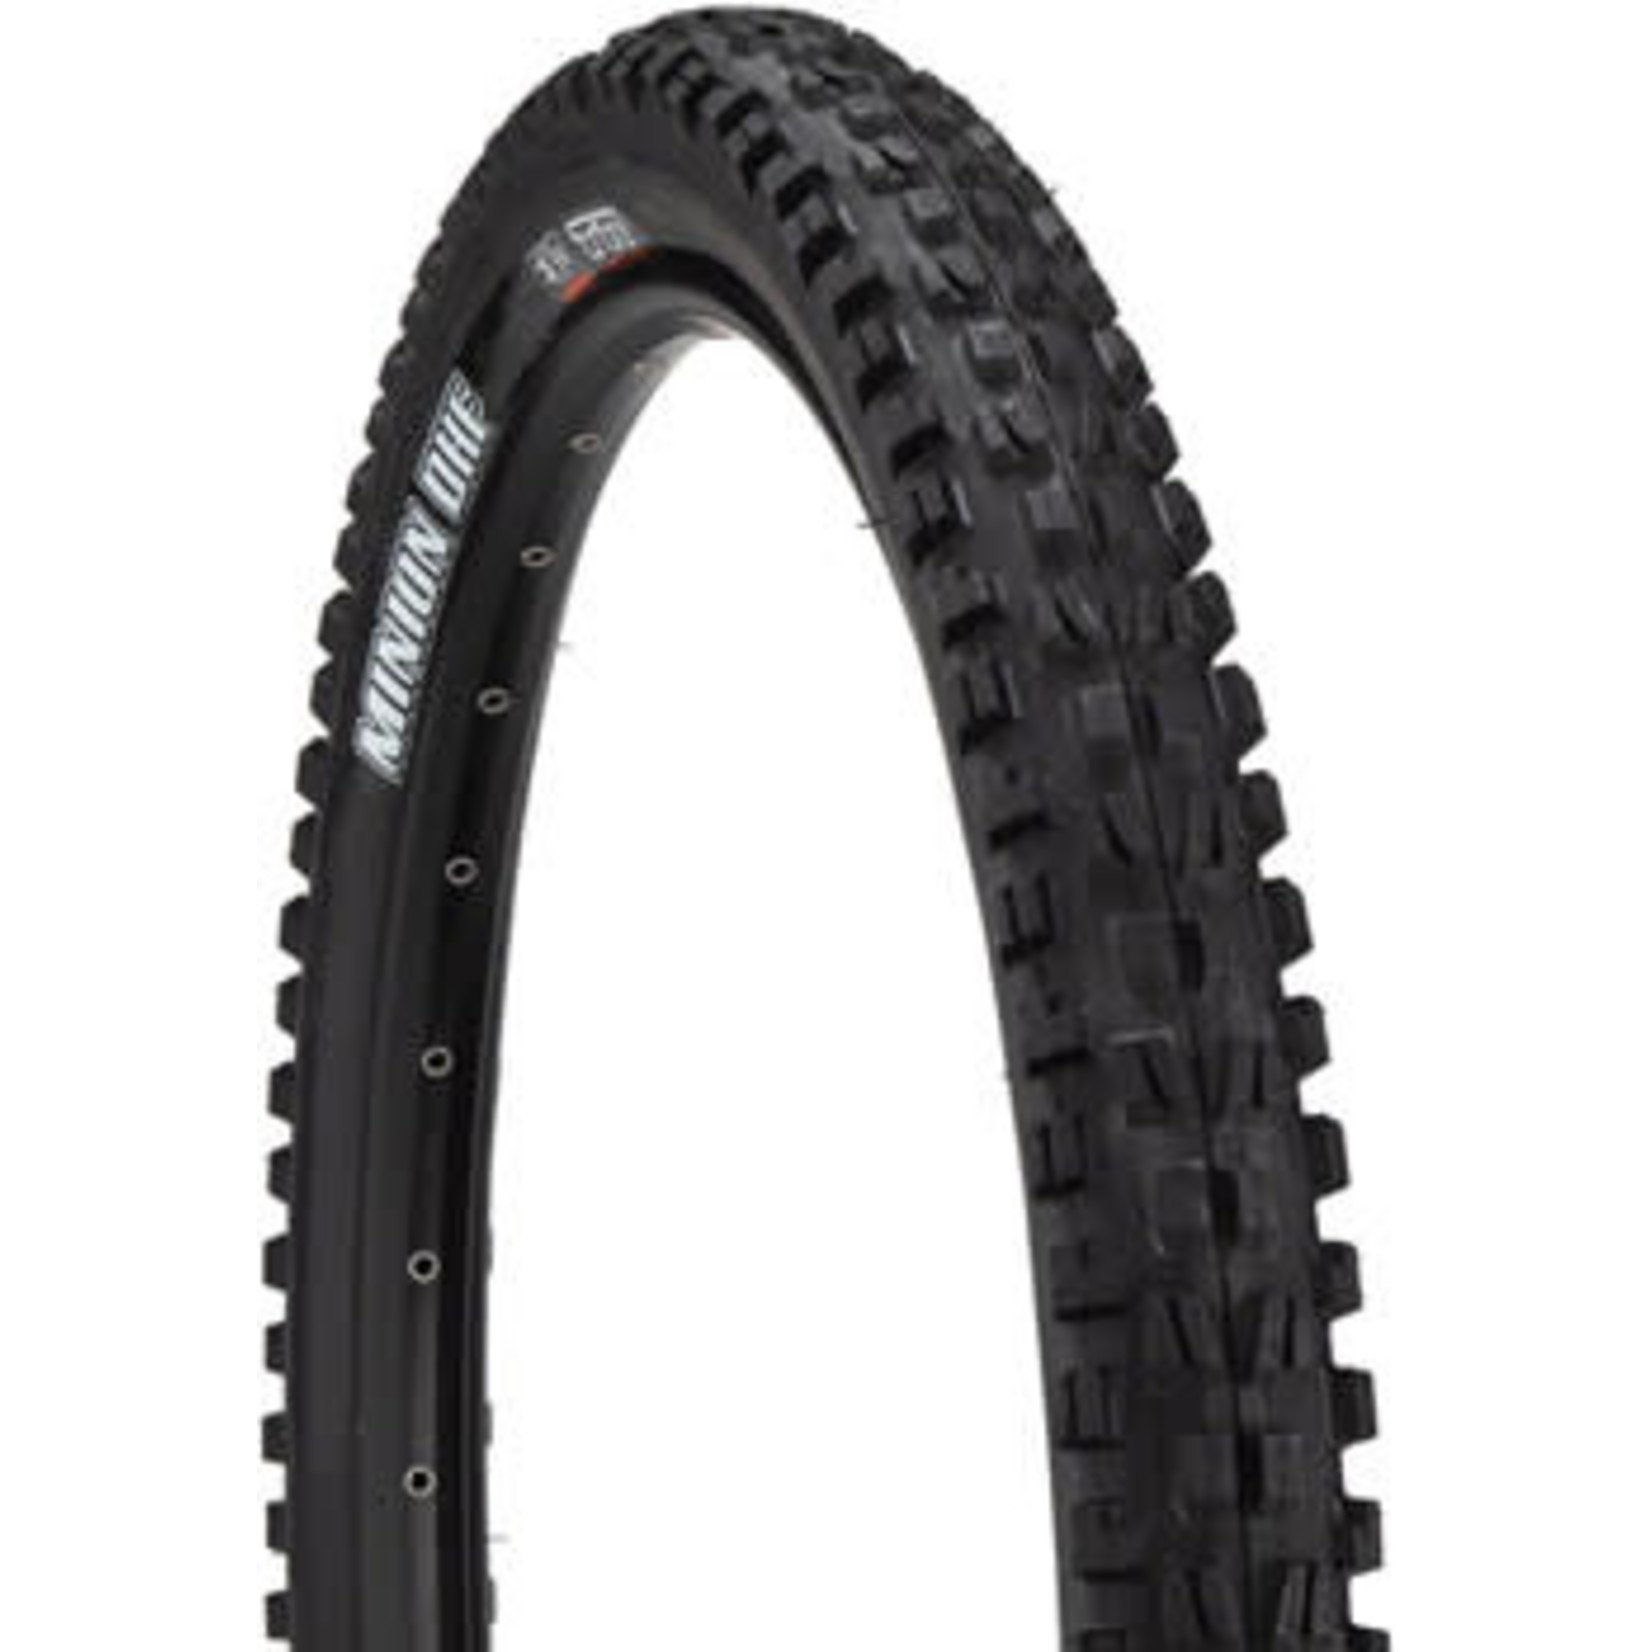 Maxxis Maxxis Tires  - 27.5x2.5WT DHF Dual